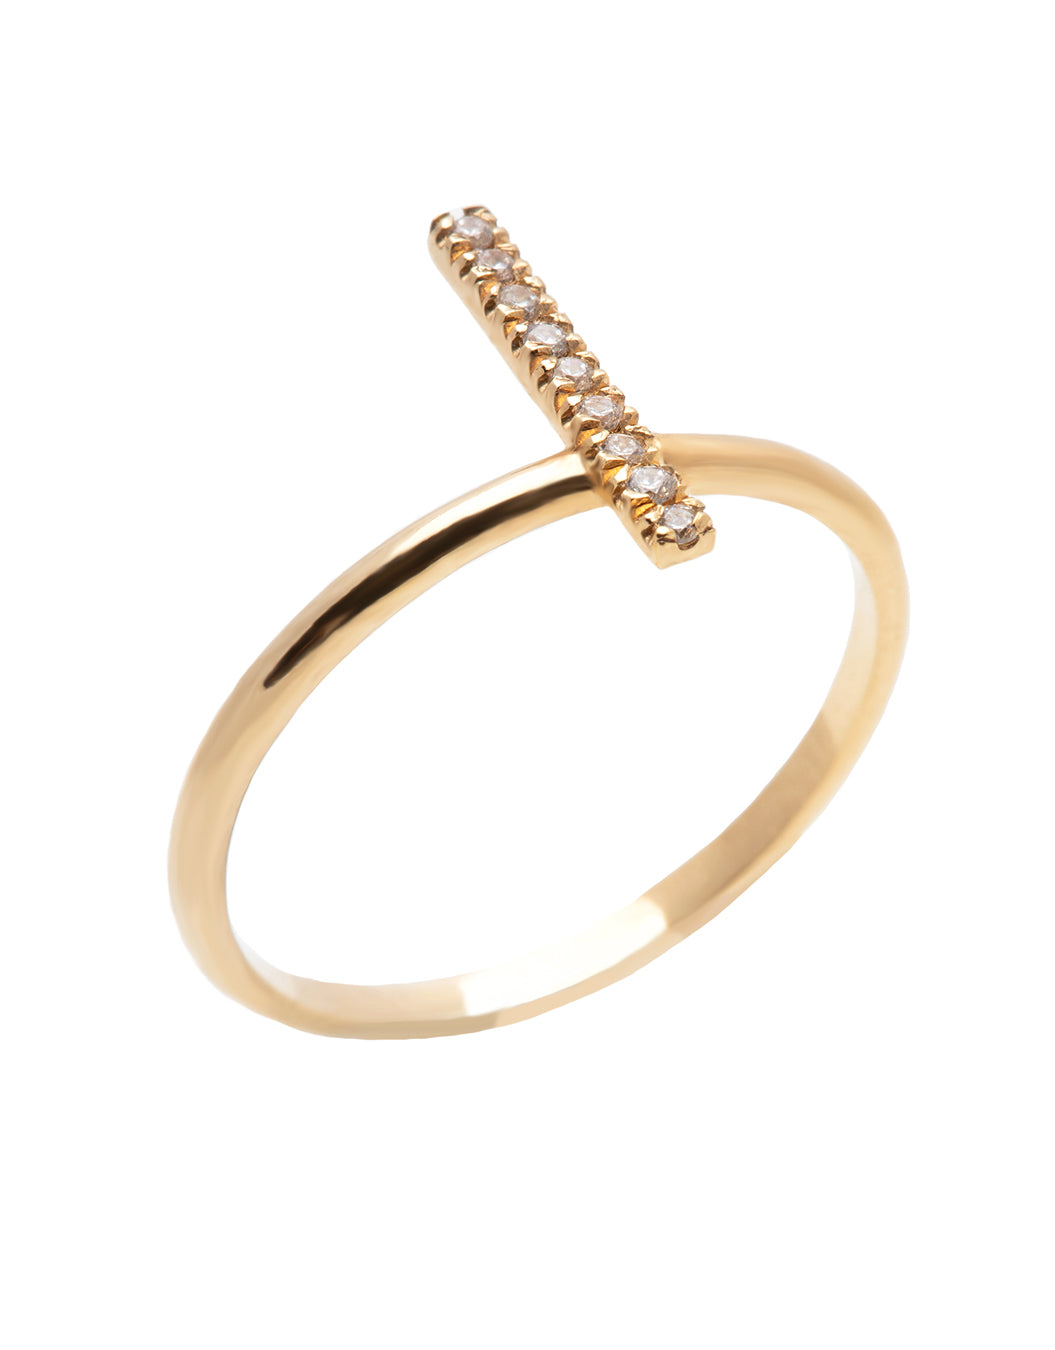 A dainty 14k yellow gold ring, with a vertical bar on top, set with nine tiny white diamonds. 